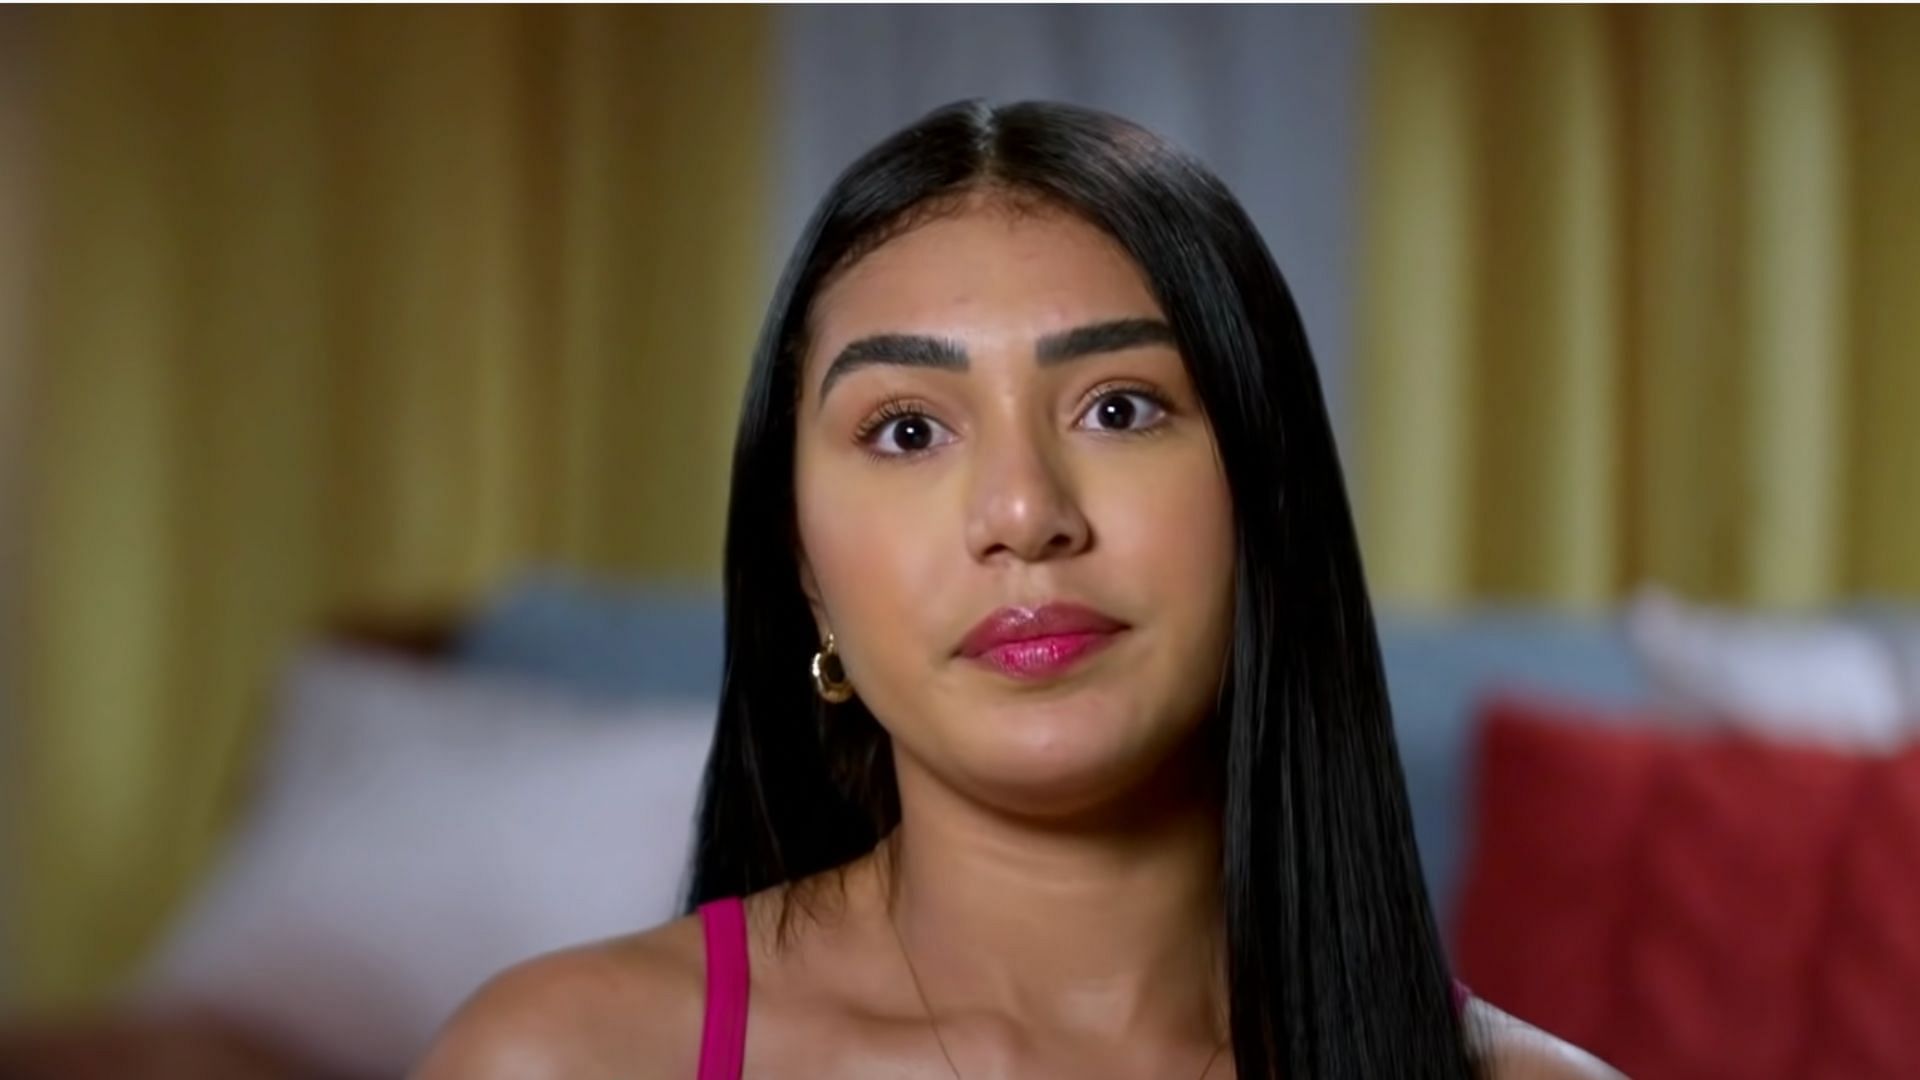 Thais from 90 Day Fiance Season 9 (Image via 90 Day Fiance)